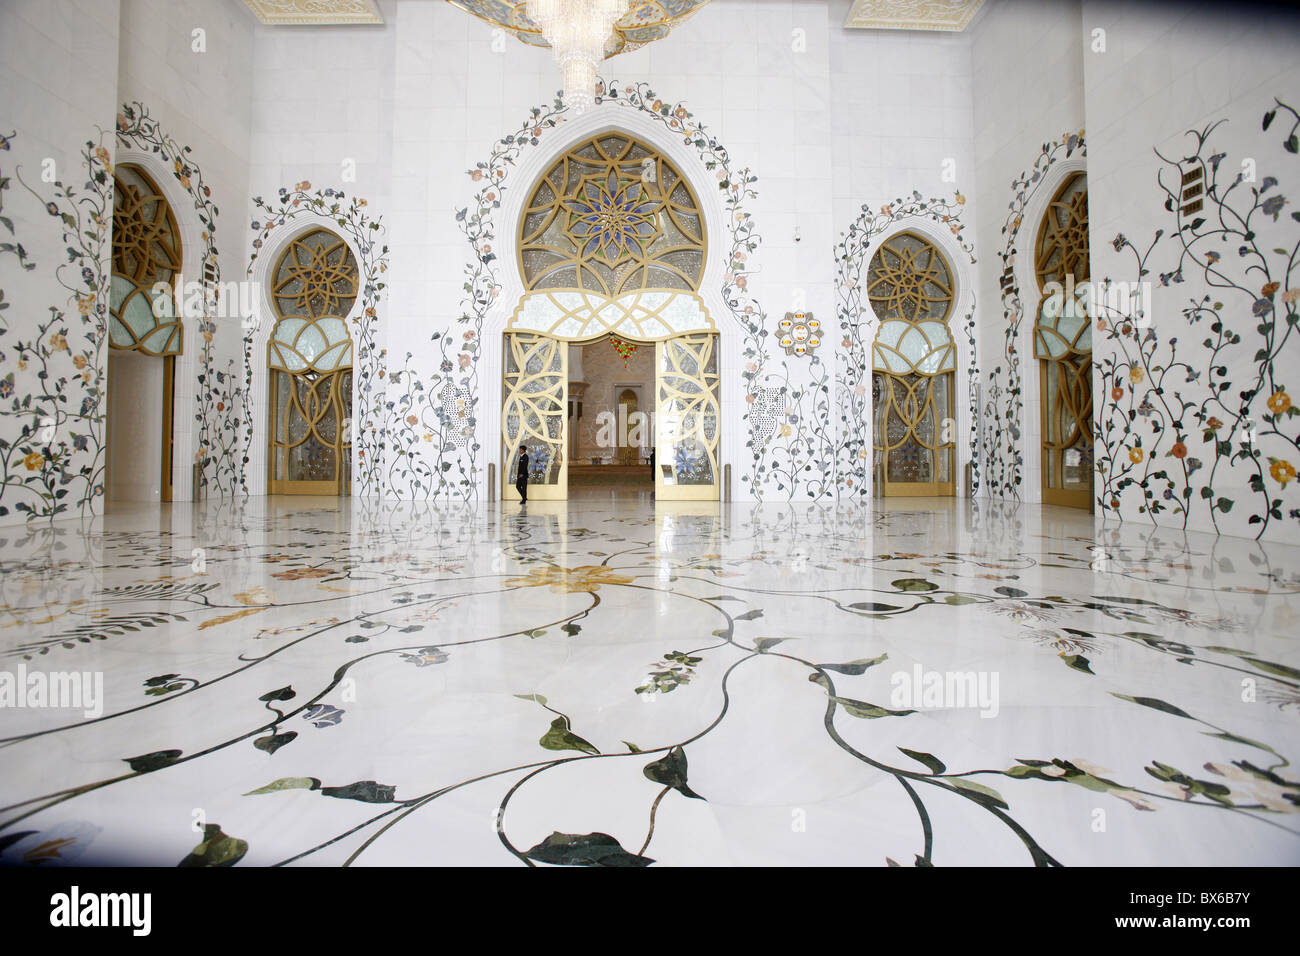 Thousands of semi-precious stones, inset in marble, decorate the Sheikh Zayed Grand Mosque, Abu Dhabi, UAE Stock Photo